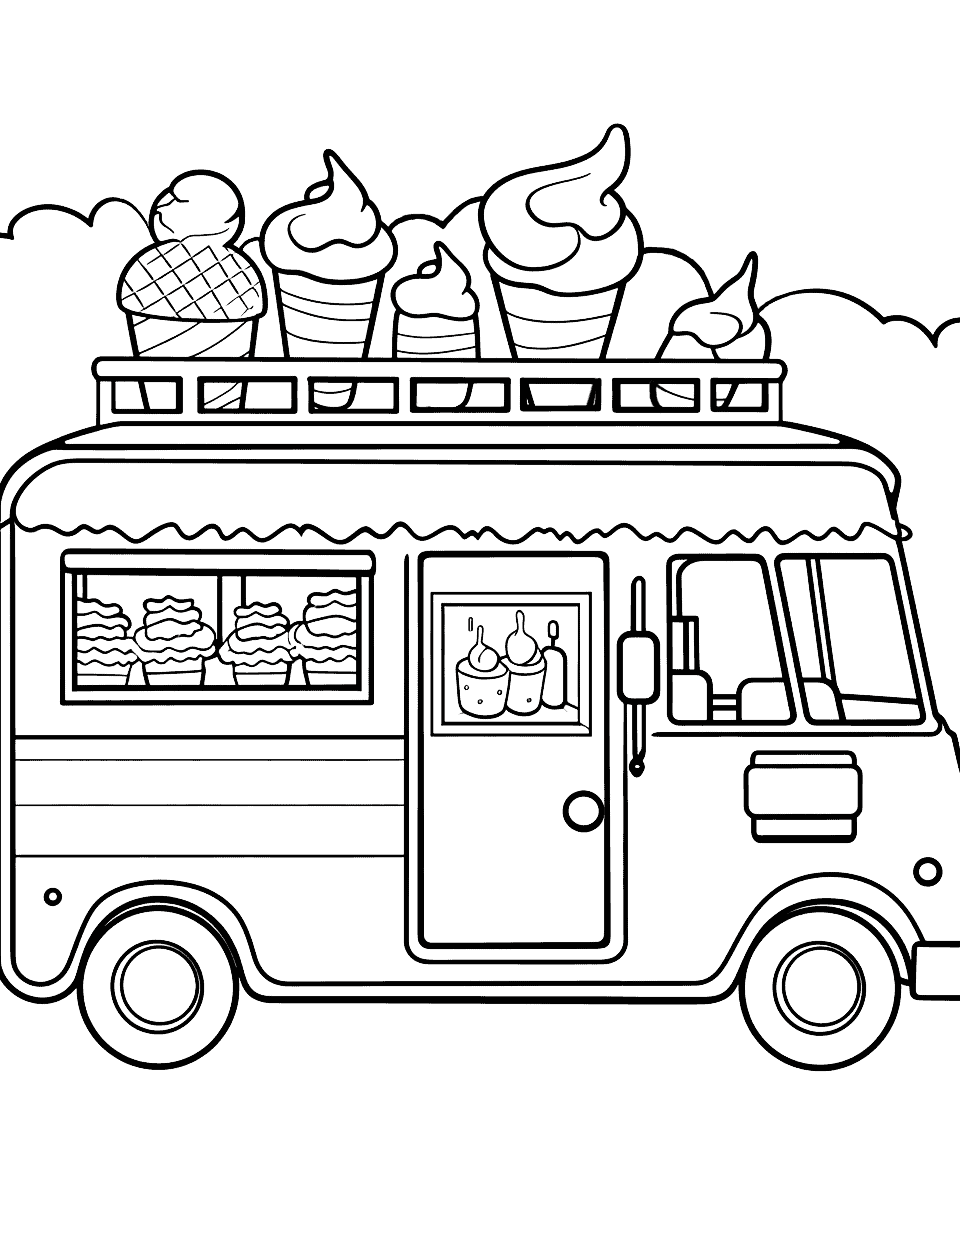 Summer coloring pages free printable sheets